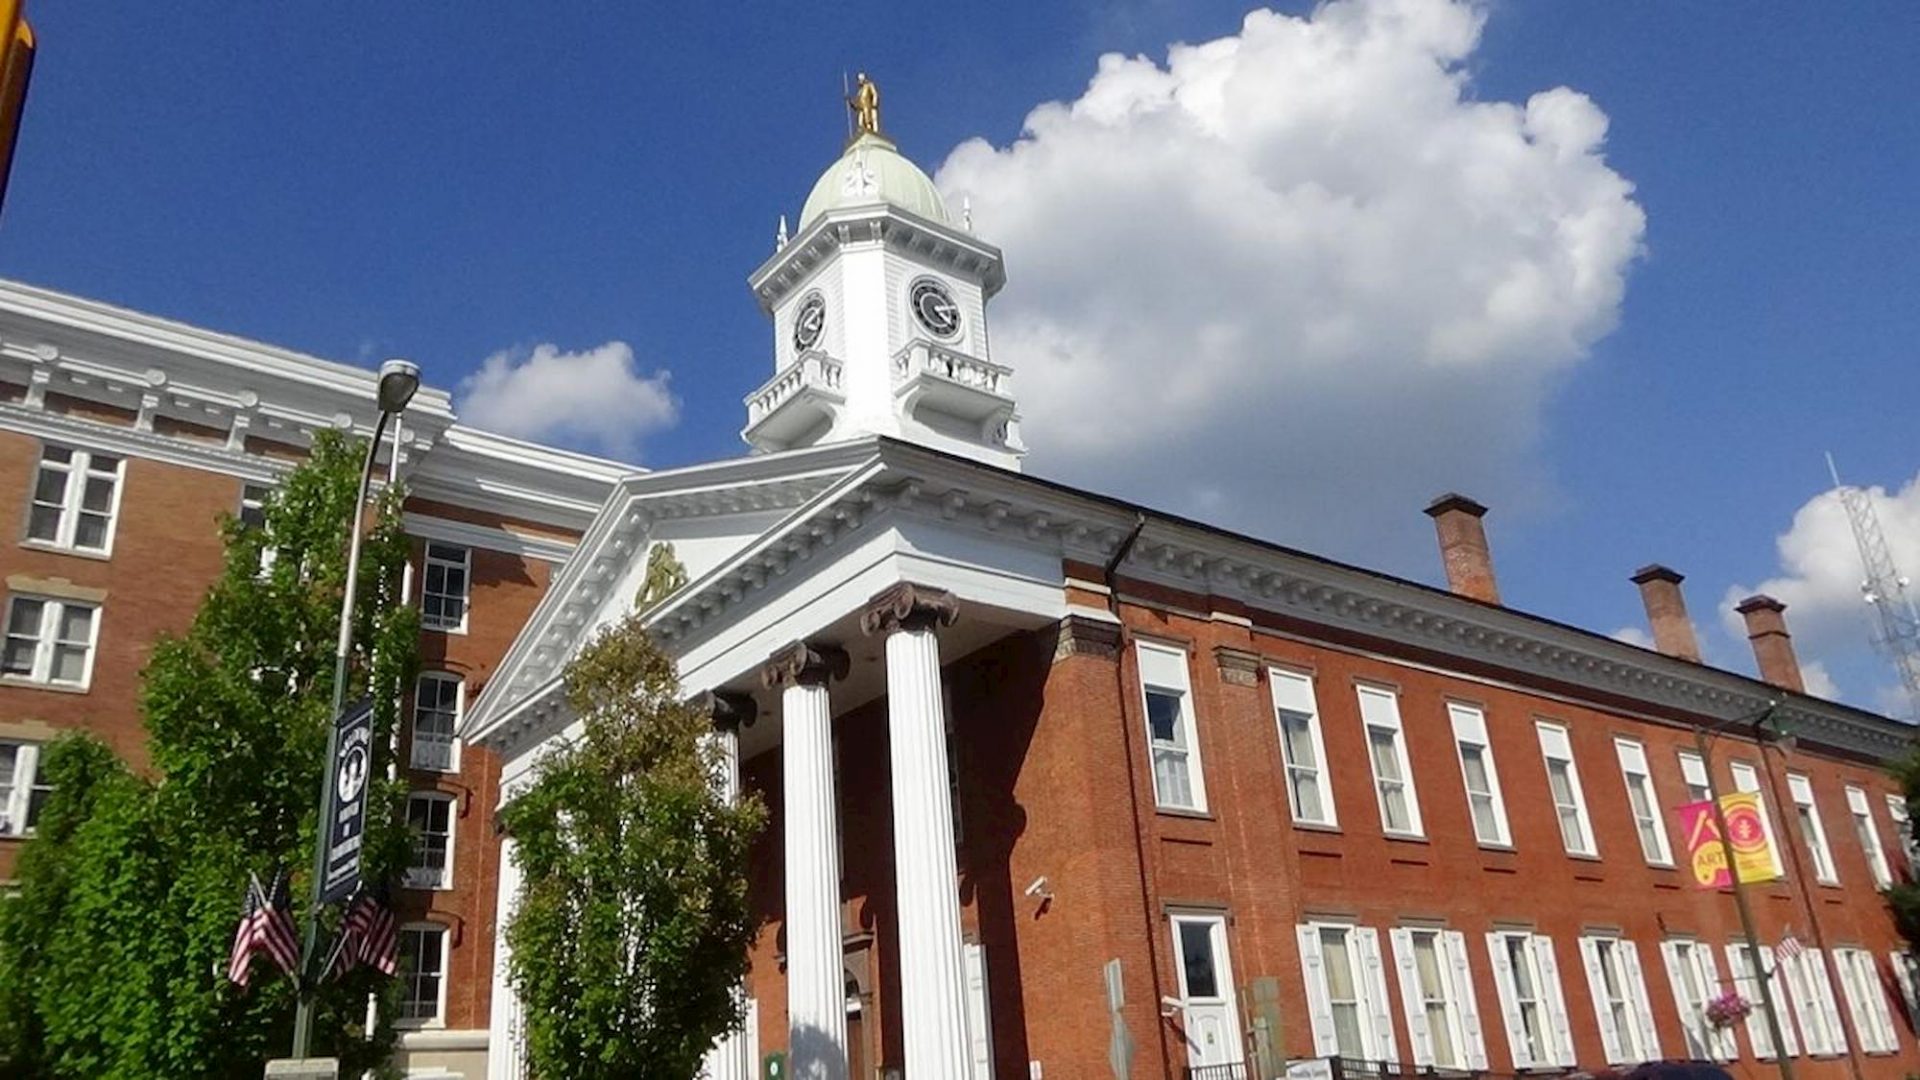 The Franklin County Courthouse in Chambersburg, Pa.